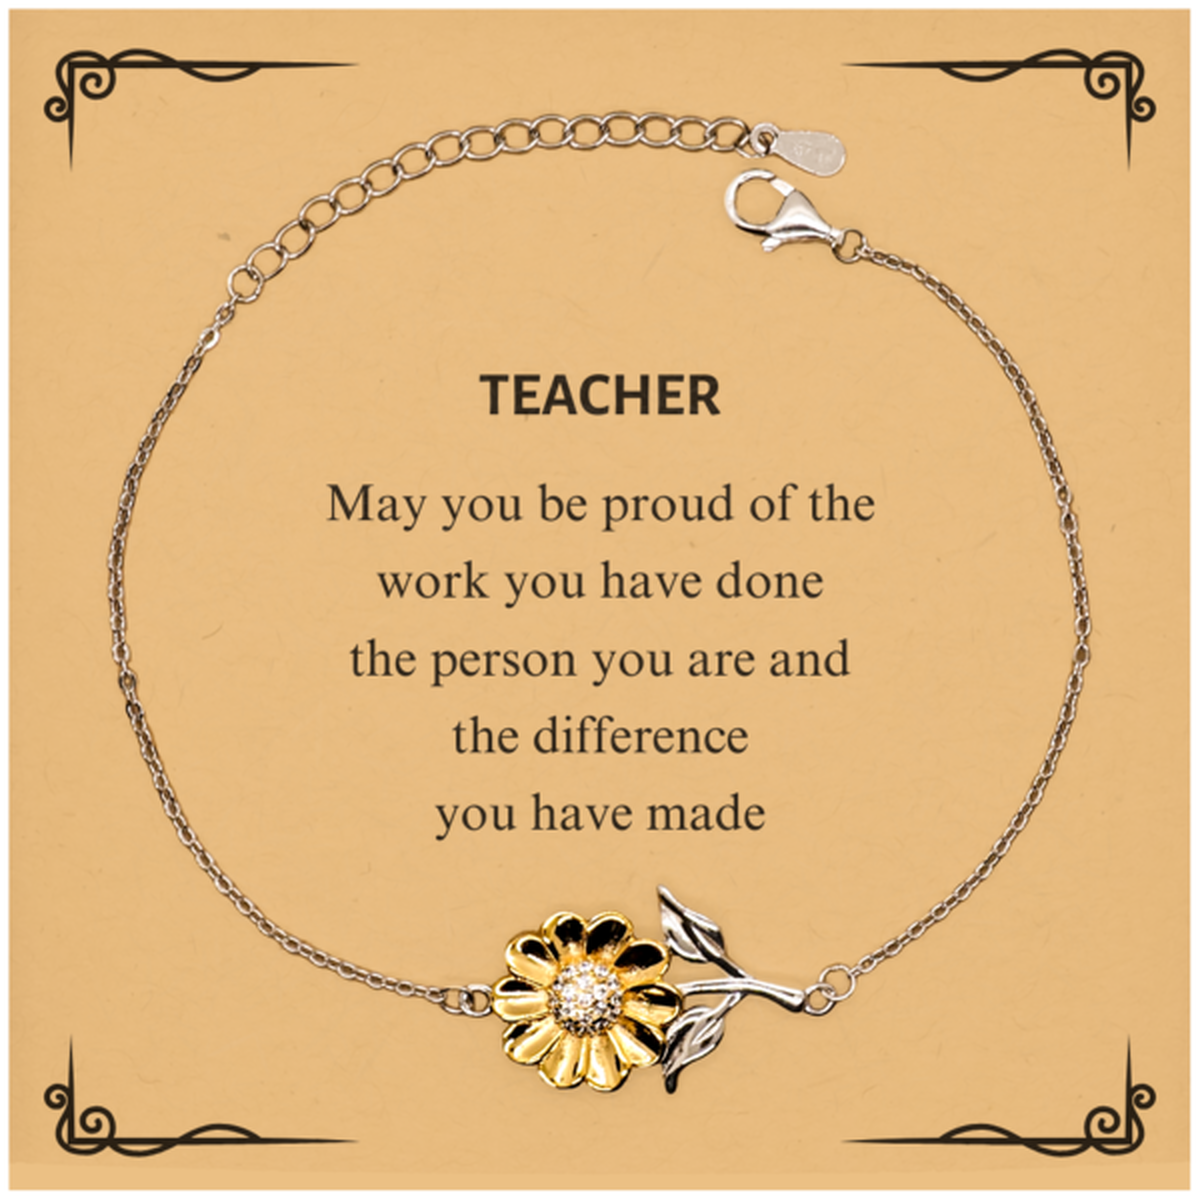 Teacher May you be proud of the work you have done, Retirement Teacher Sunflower Bracelet for Colleague Appreciation Gifts Amazing for Teacher